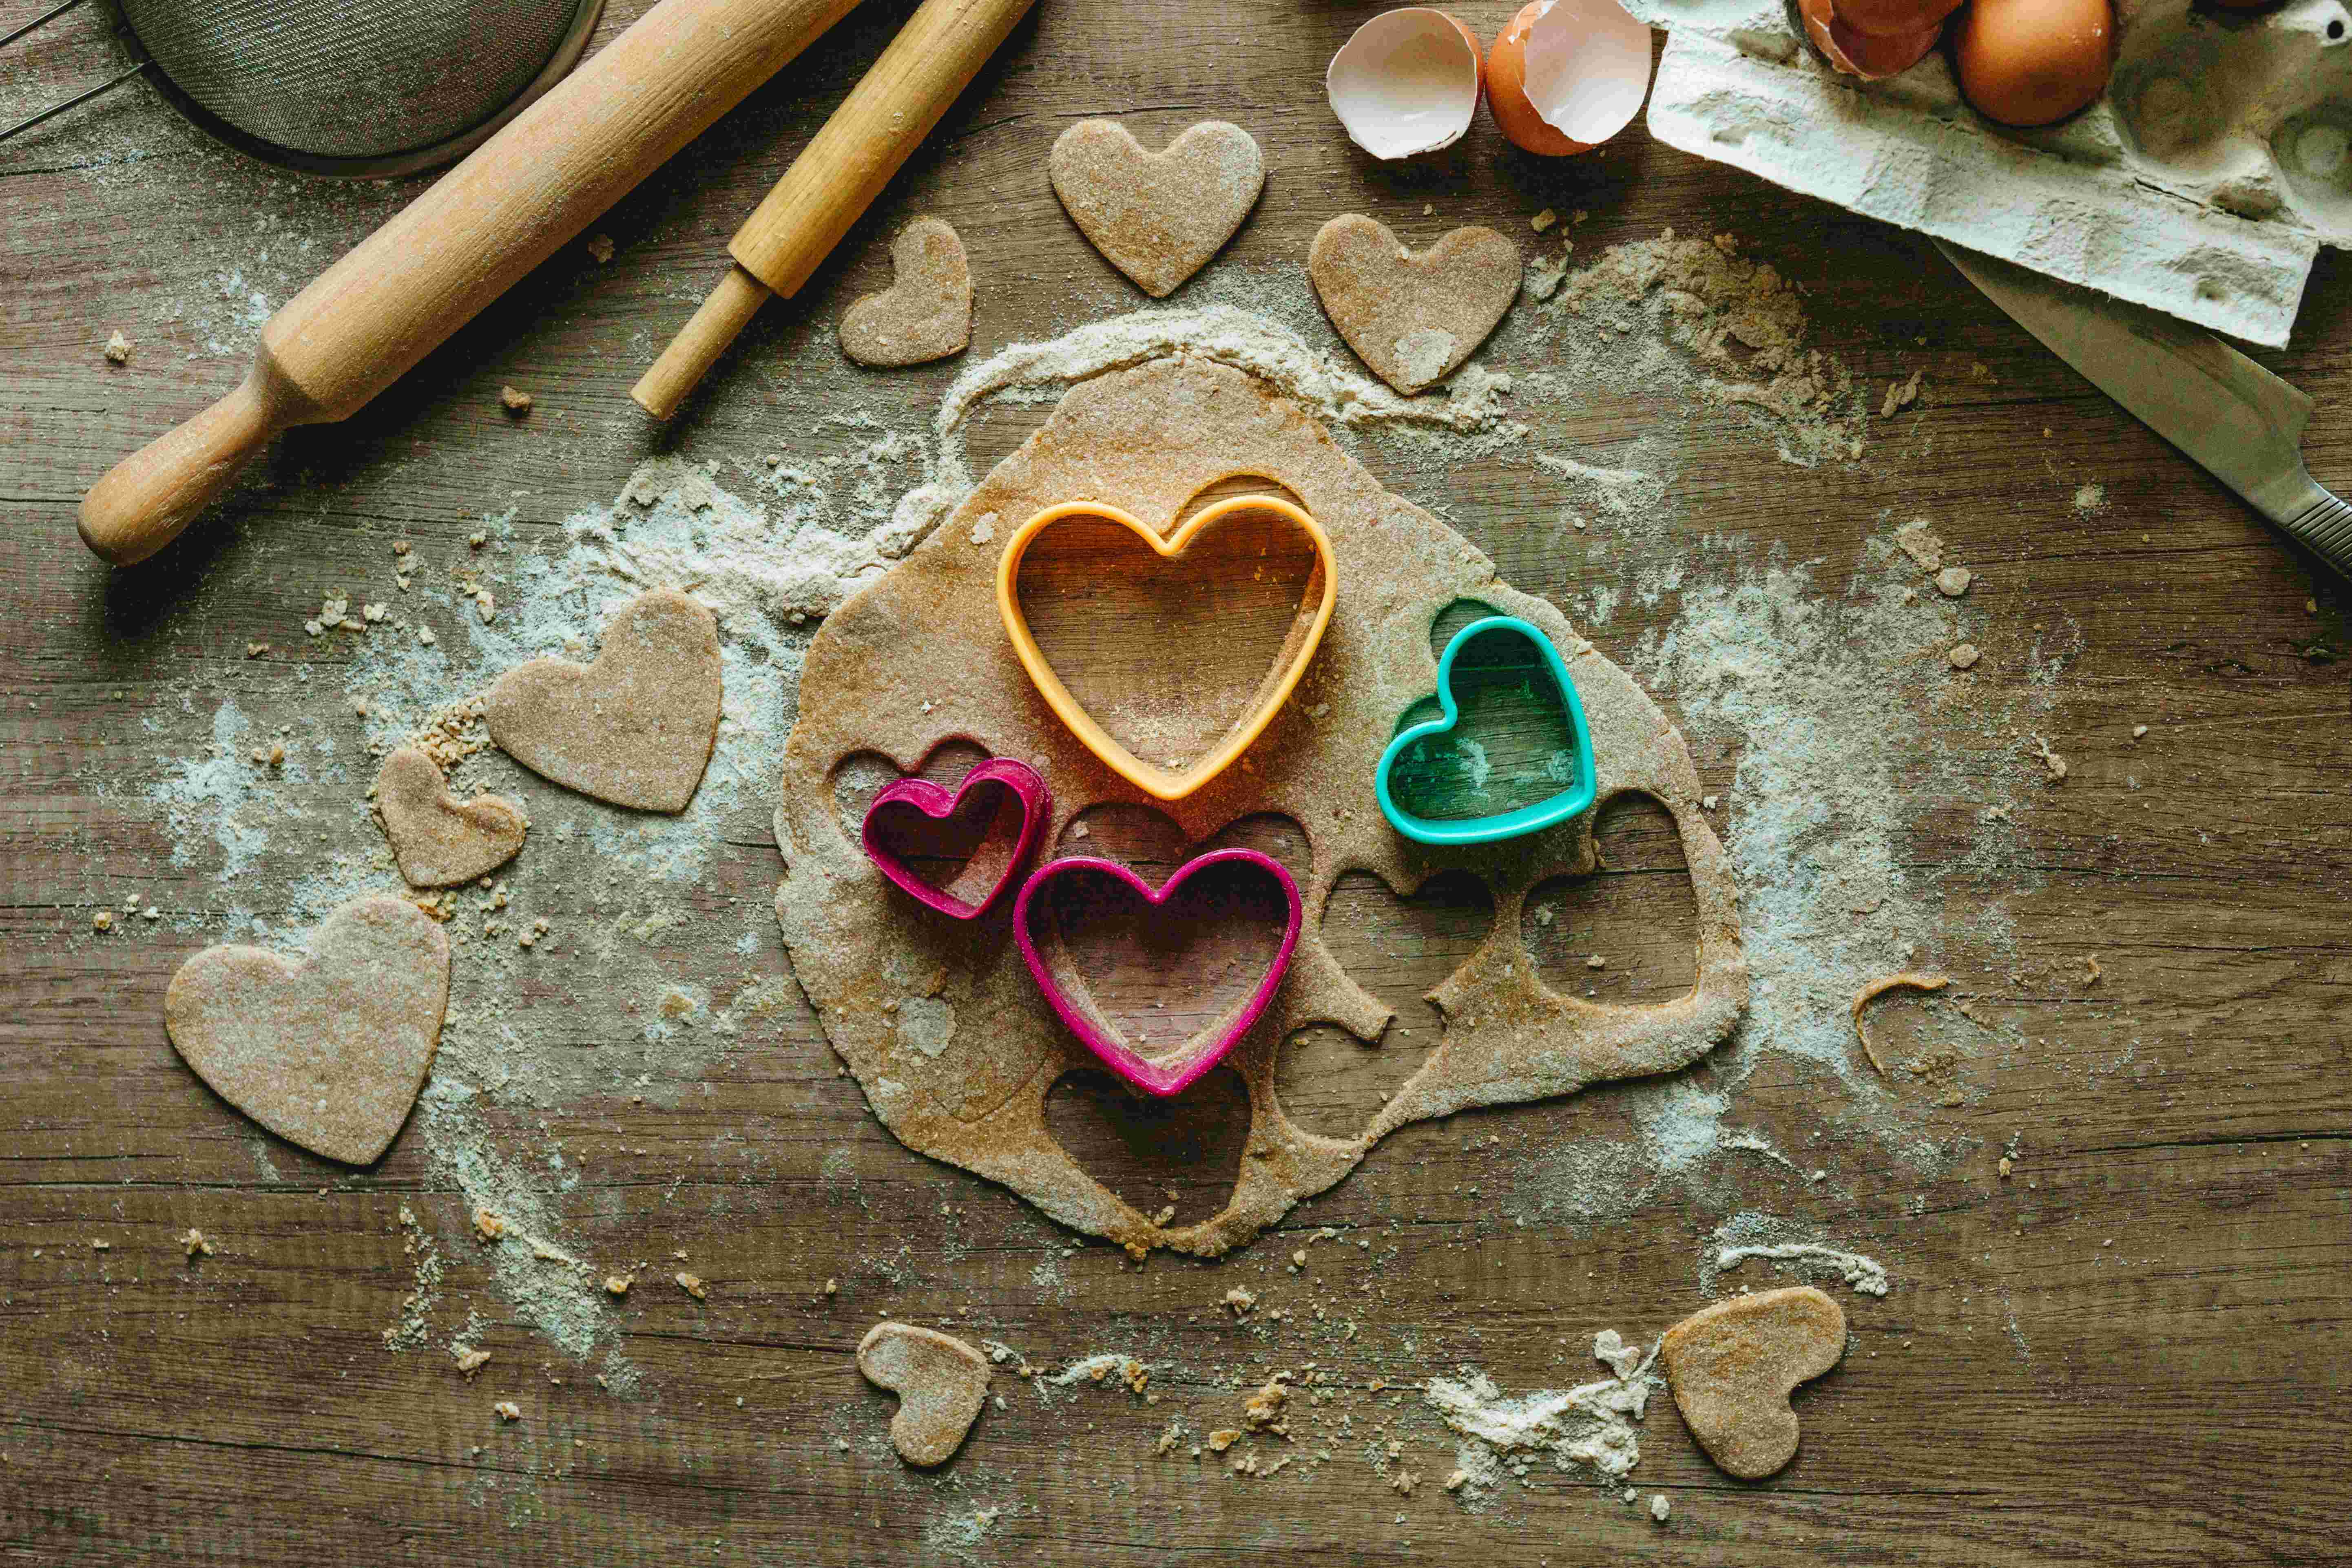 Colorful, heart-shaped cookie cutters for Valentine’s Day baking.